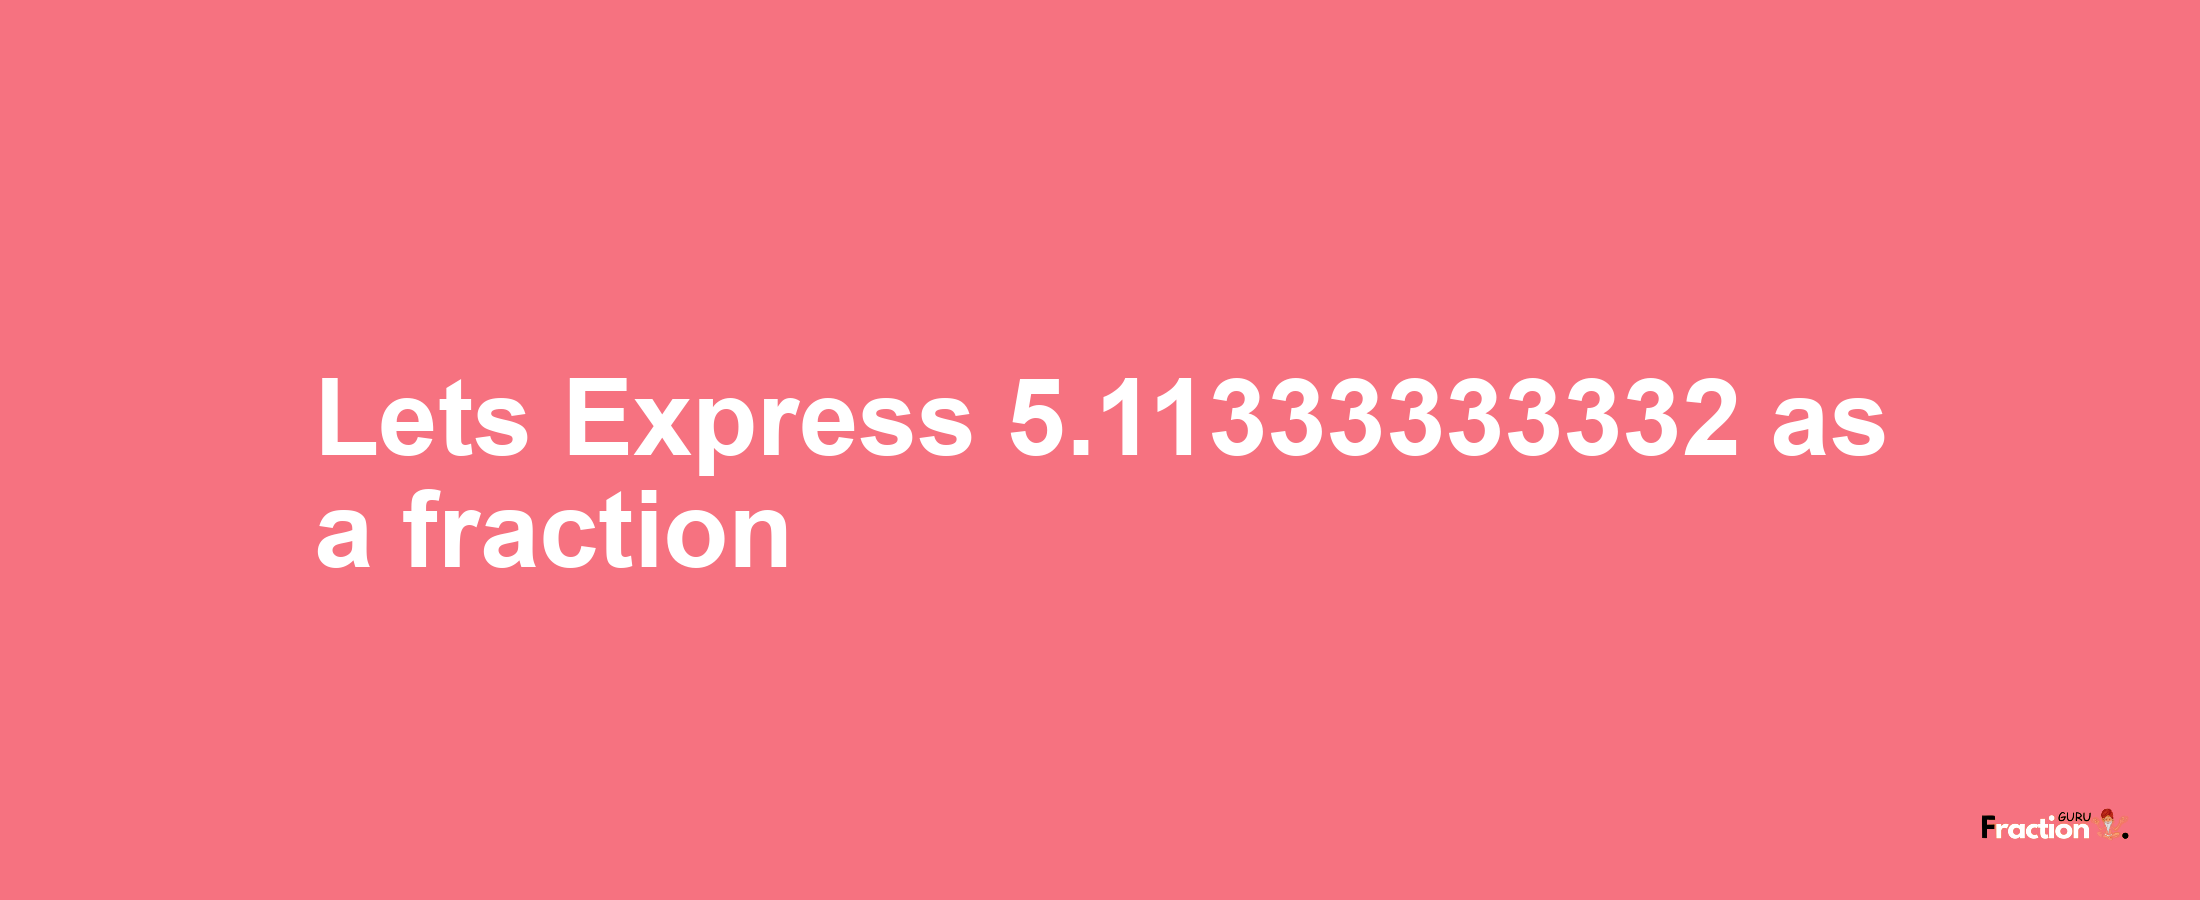 Lets Express 5.11333333332 as afraction